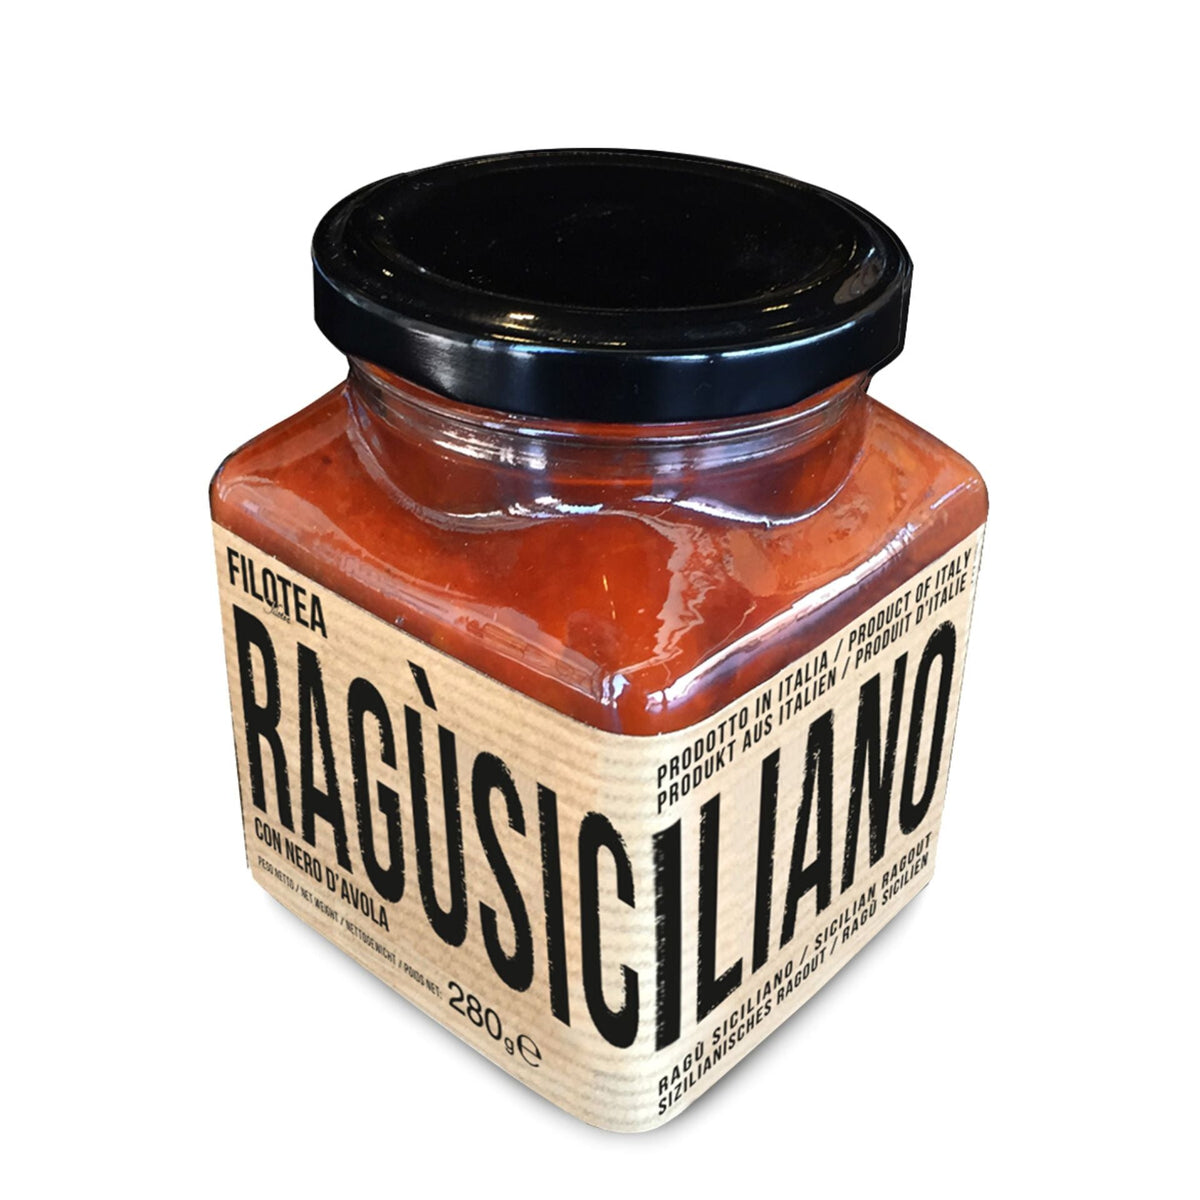 Filotea Sicilian Ragu Pasta Sauce 280g  | Imported and distributed in the UK by Just Gourmet Foods